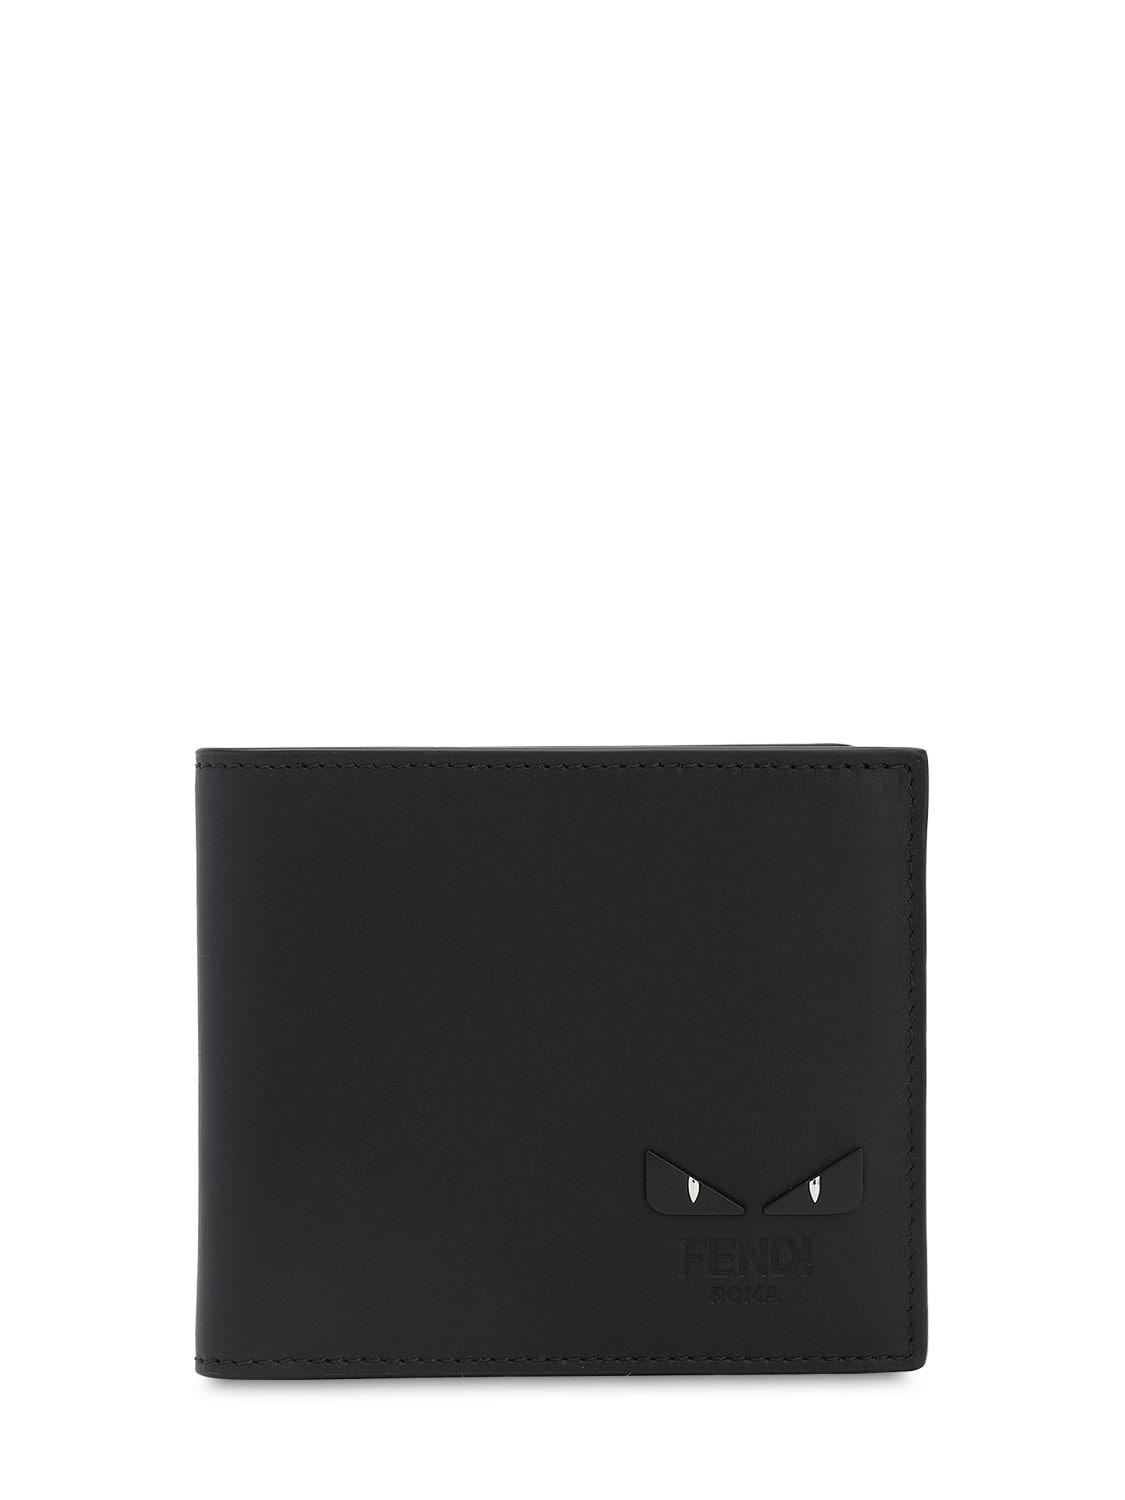 Leather Billfold Wallet W/cubic Eyes | The Fashionisto